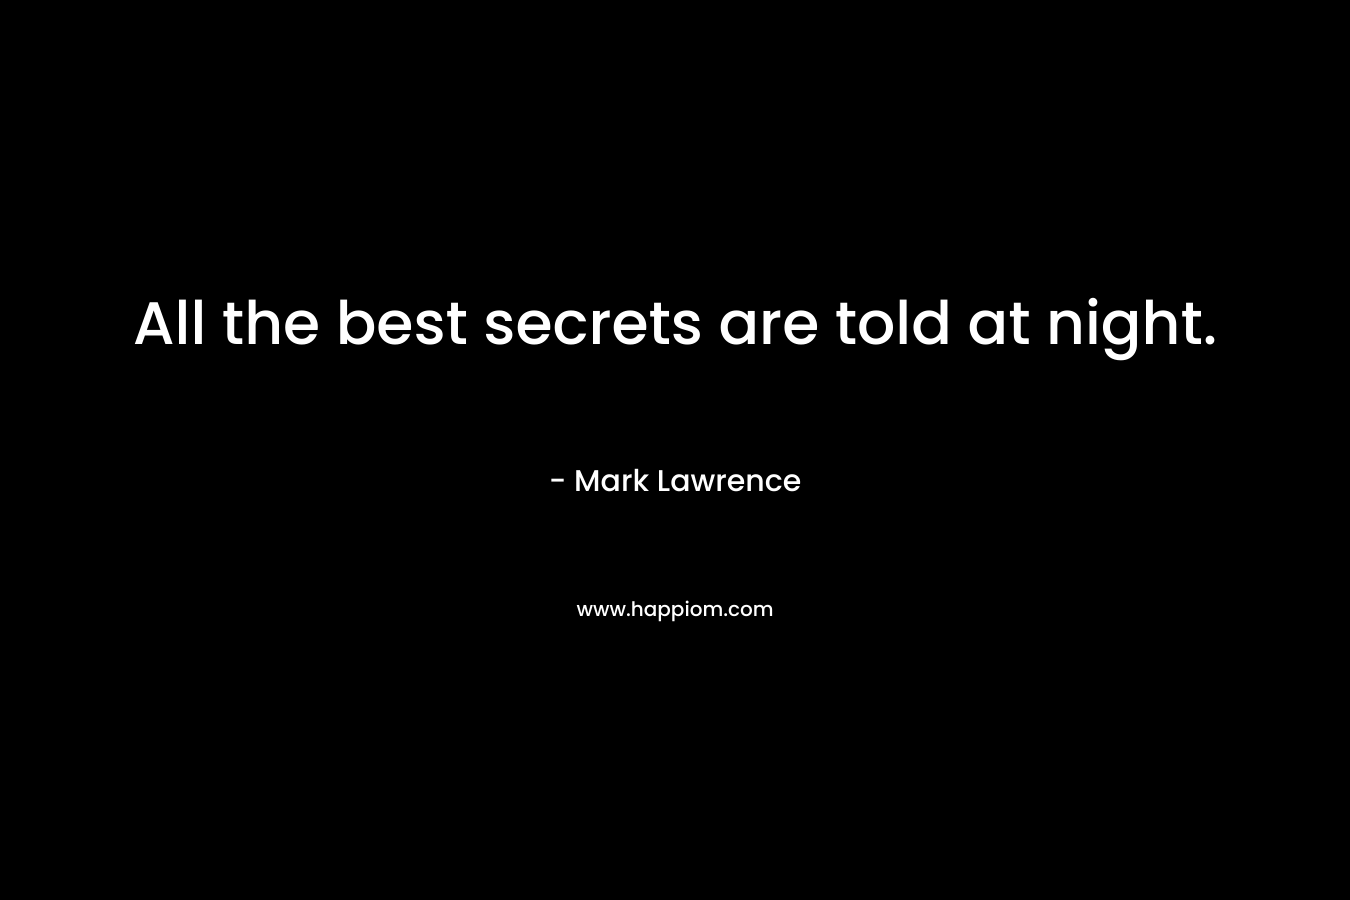 All the best secrets are told at night.